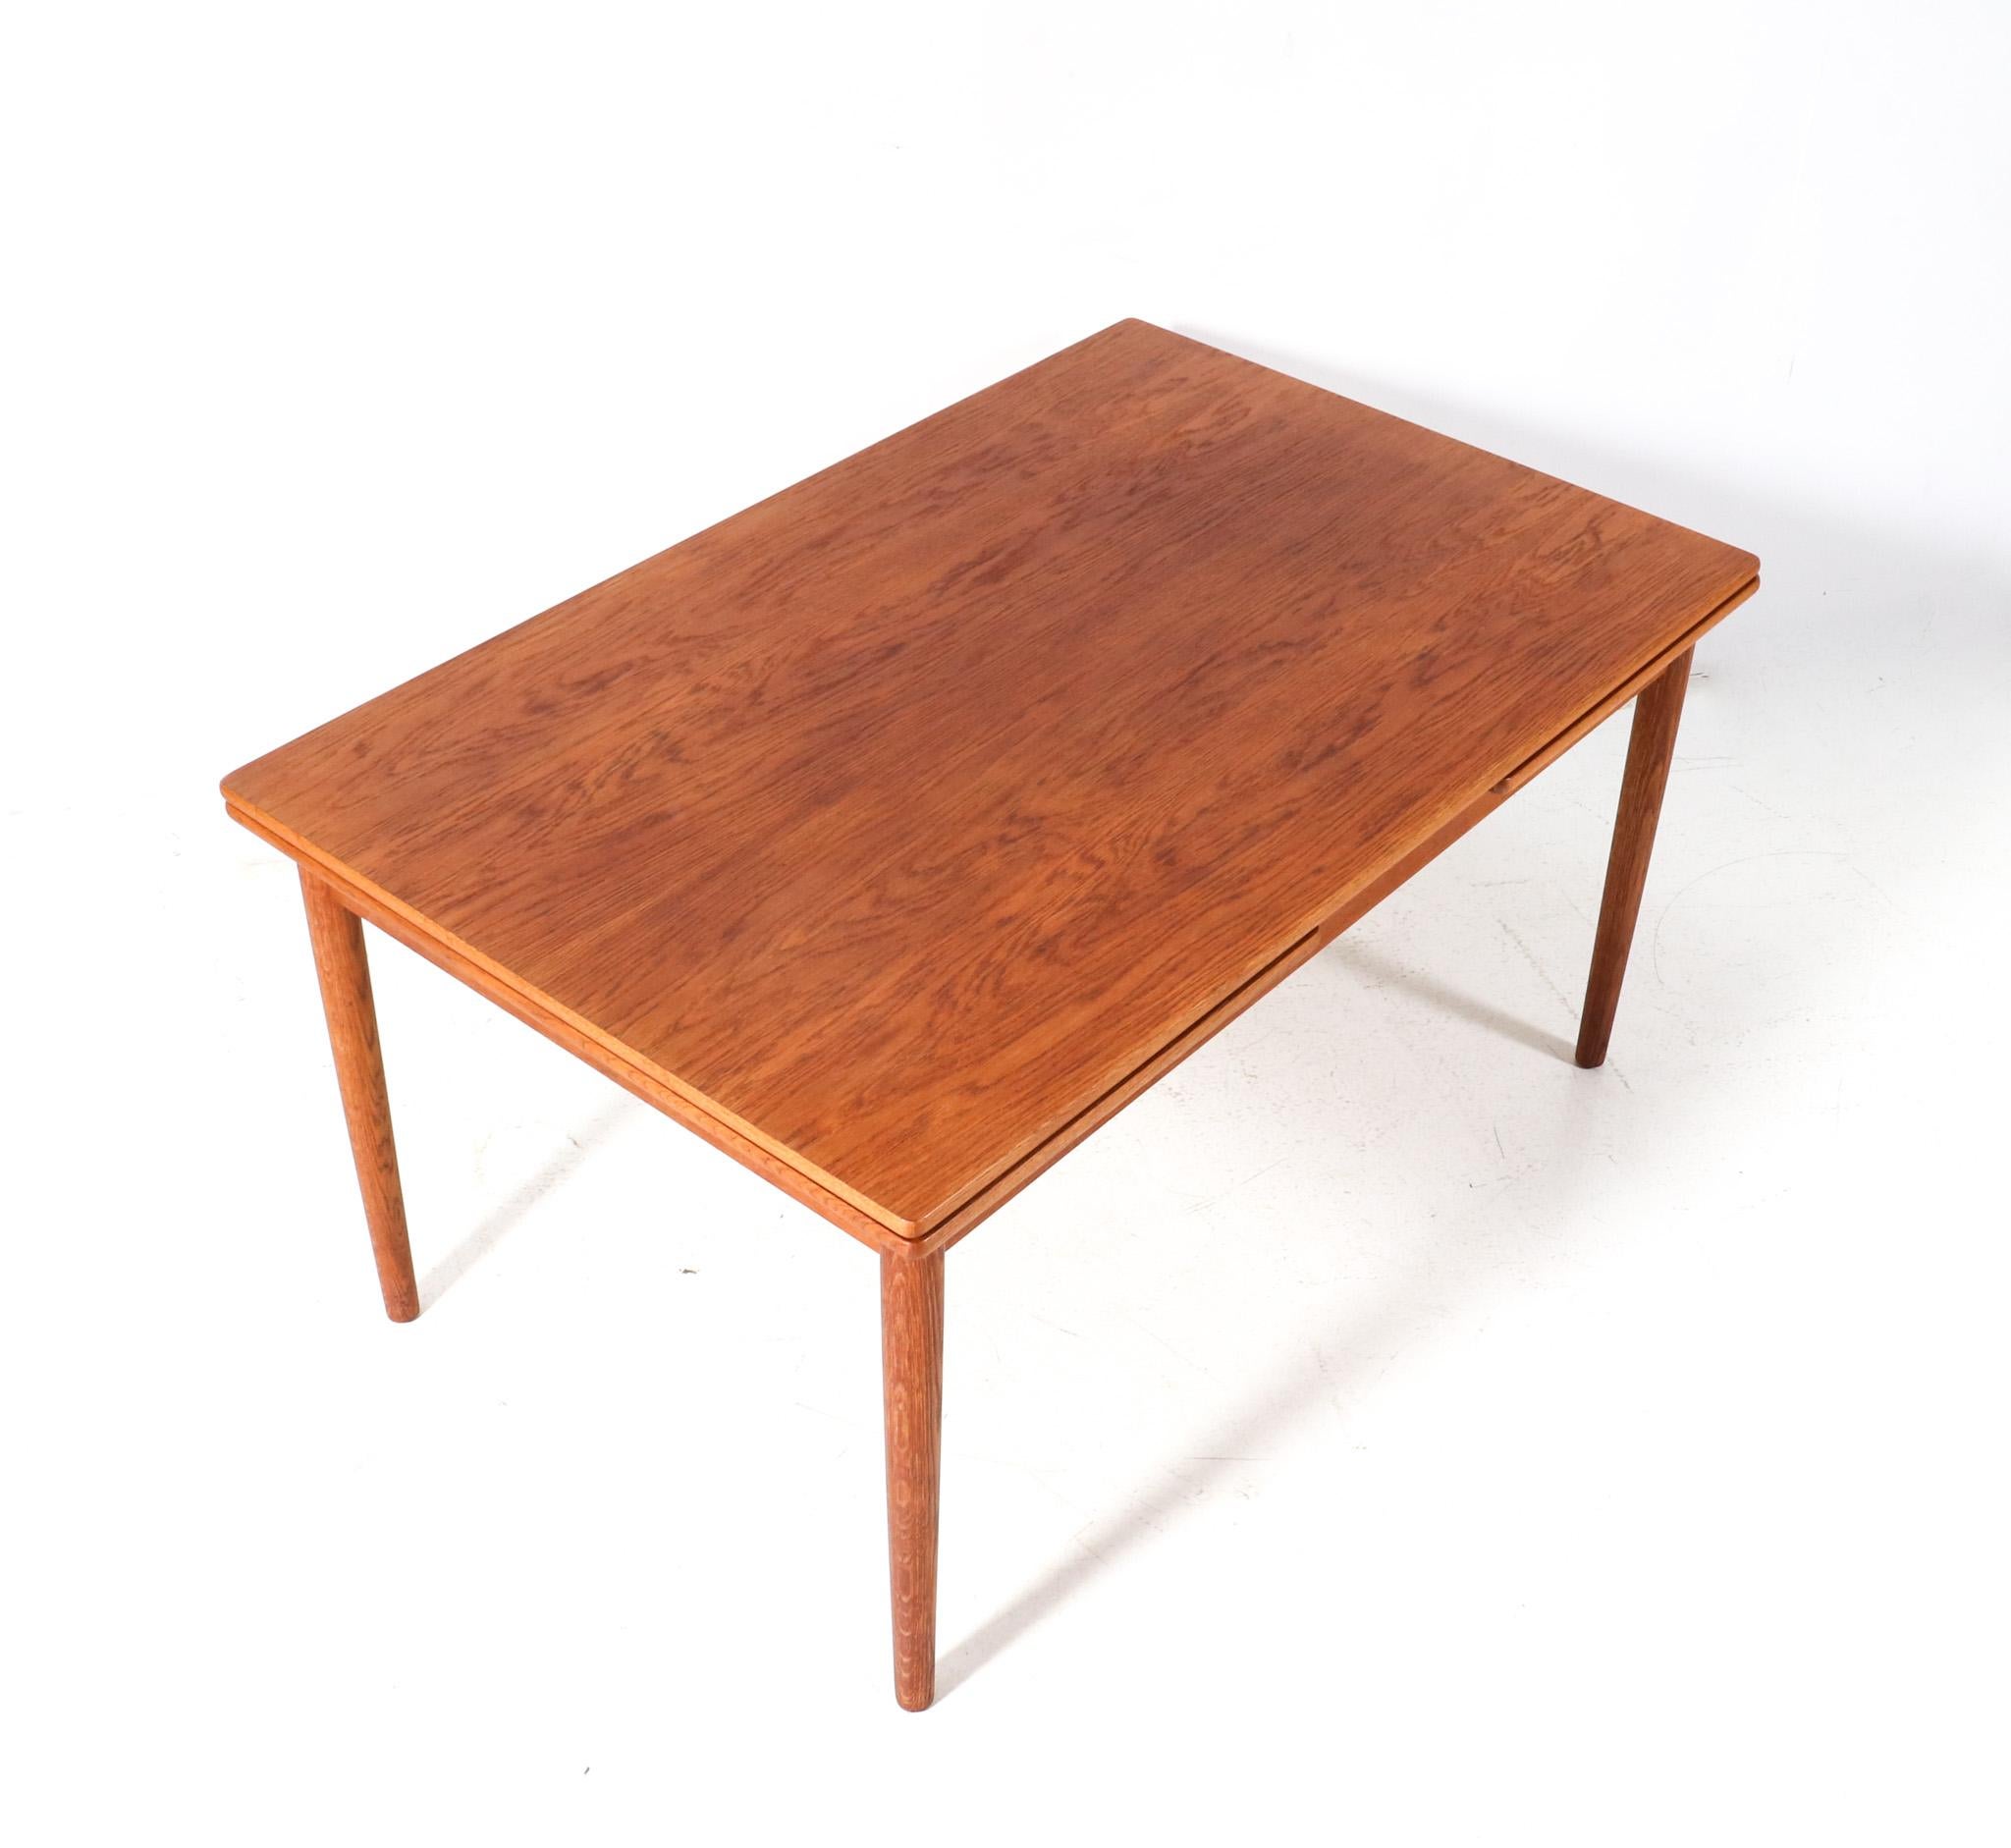 Mid-20th Century  Mid-Century Modern Teak Extendable Dining Room Table Mo. 215 by Farstrup, 1960s For Sale